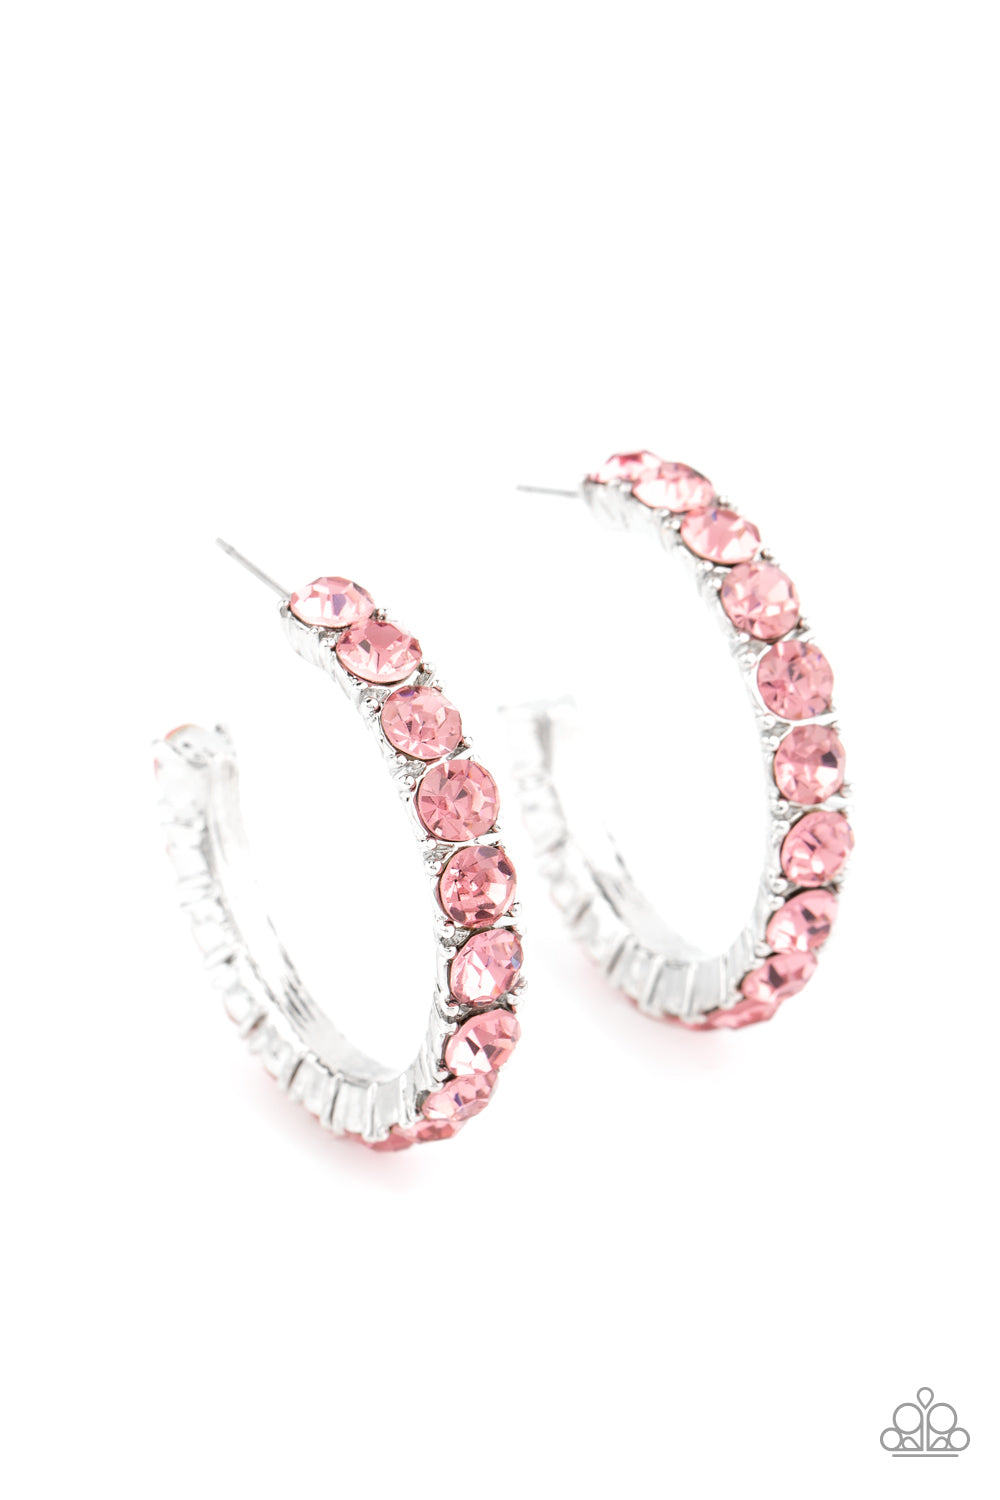 Paparazzi Accessories CLASSY is in Session - Pink Earrings - Lady T Accessories